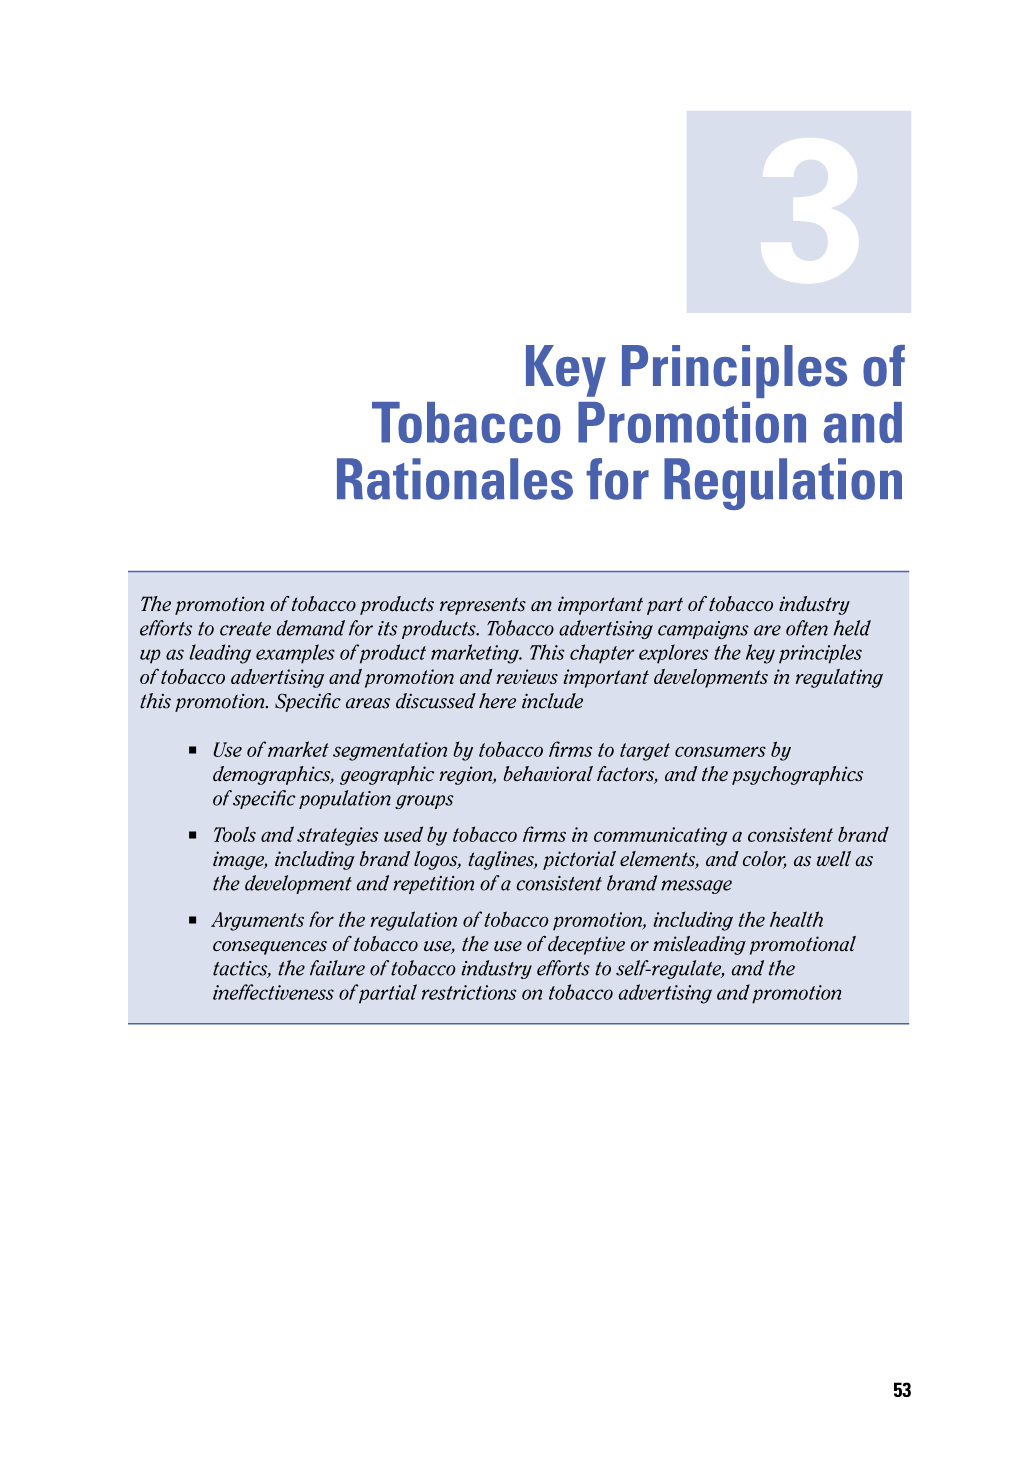 Key Principles of Tobacco Promotion and Rationales for Regulation